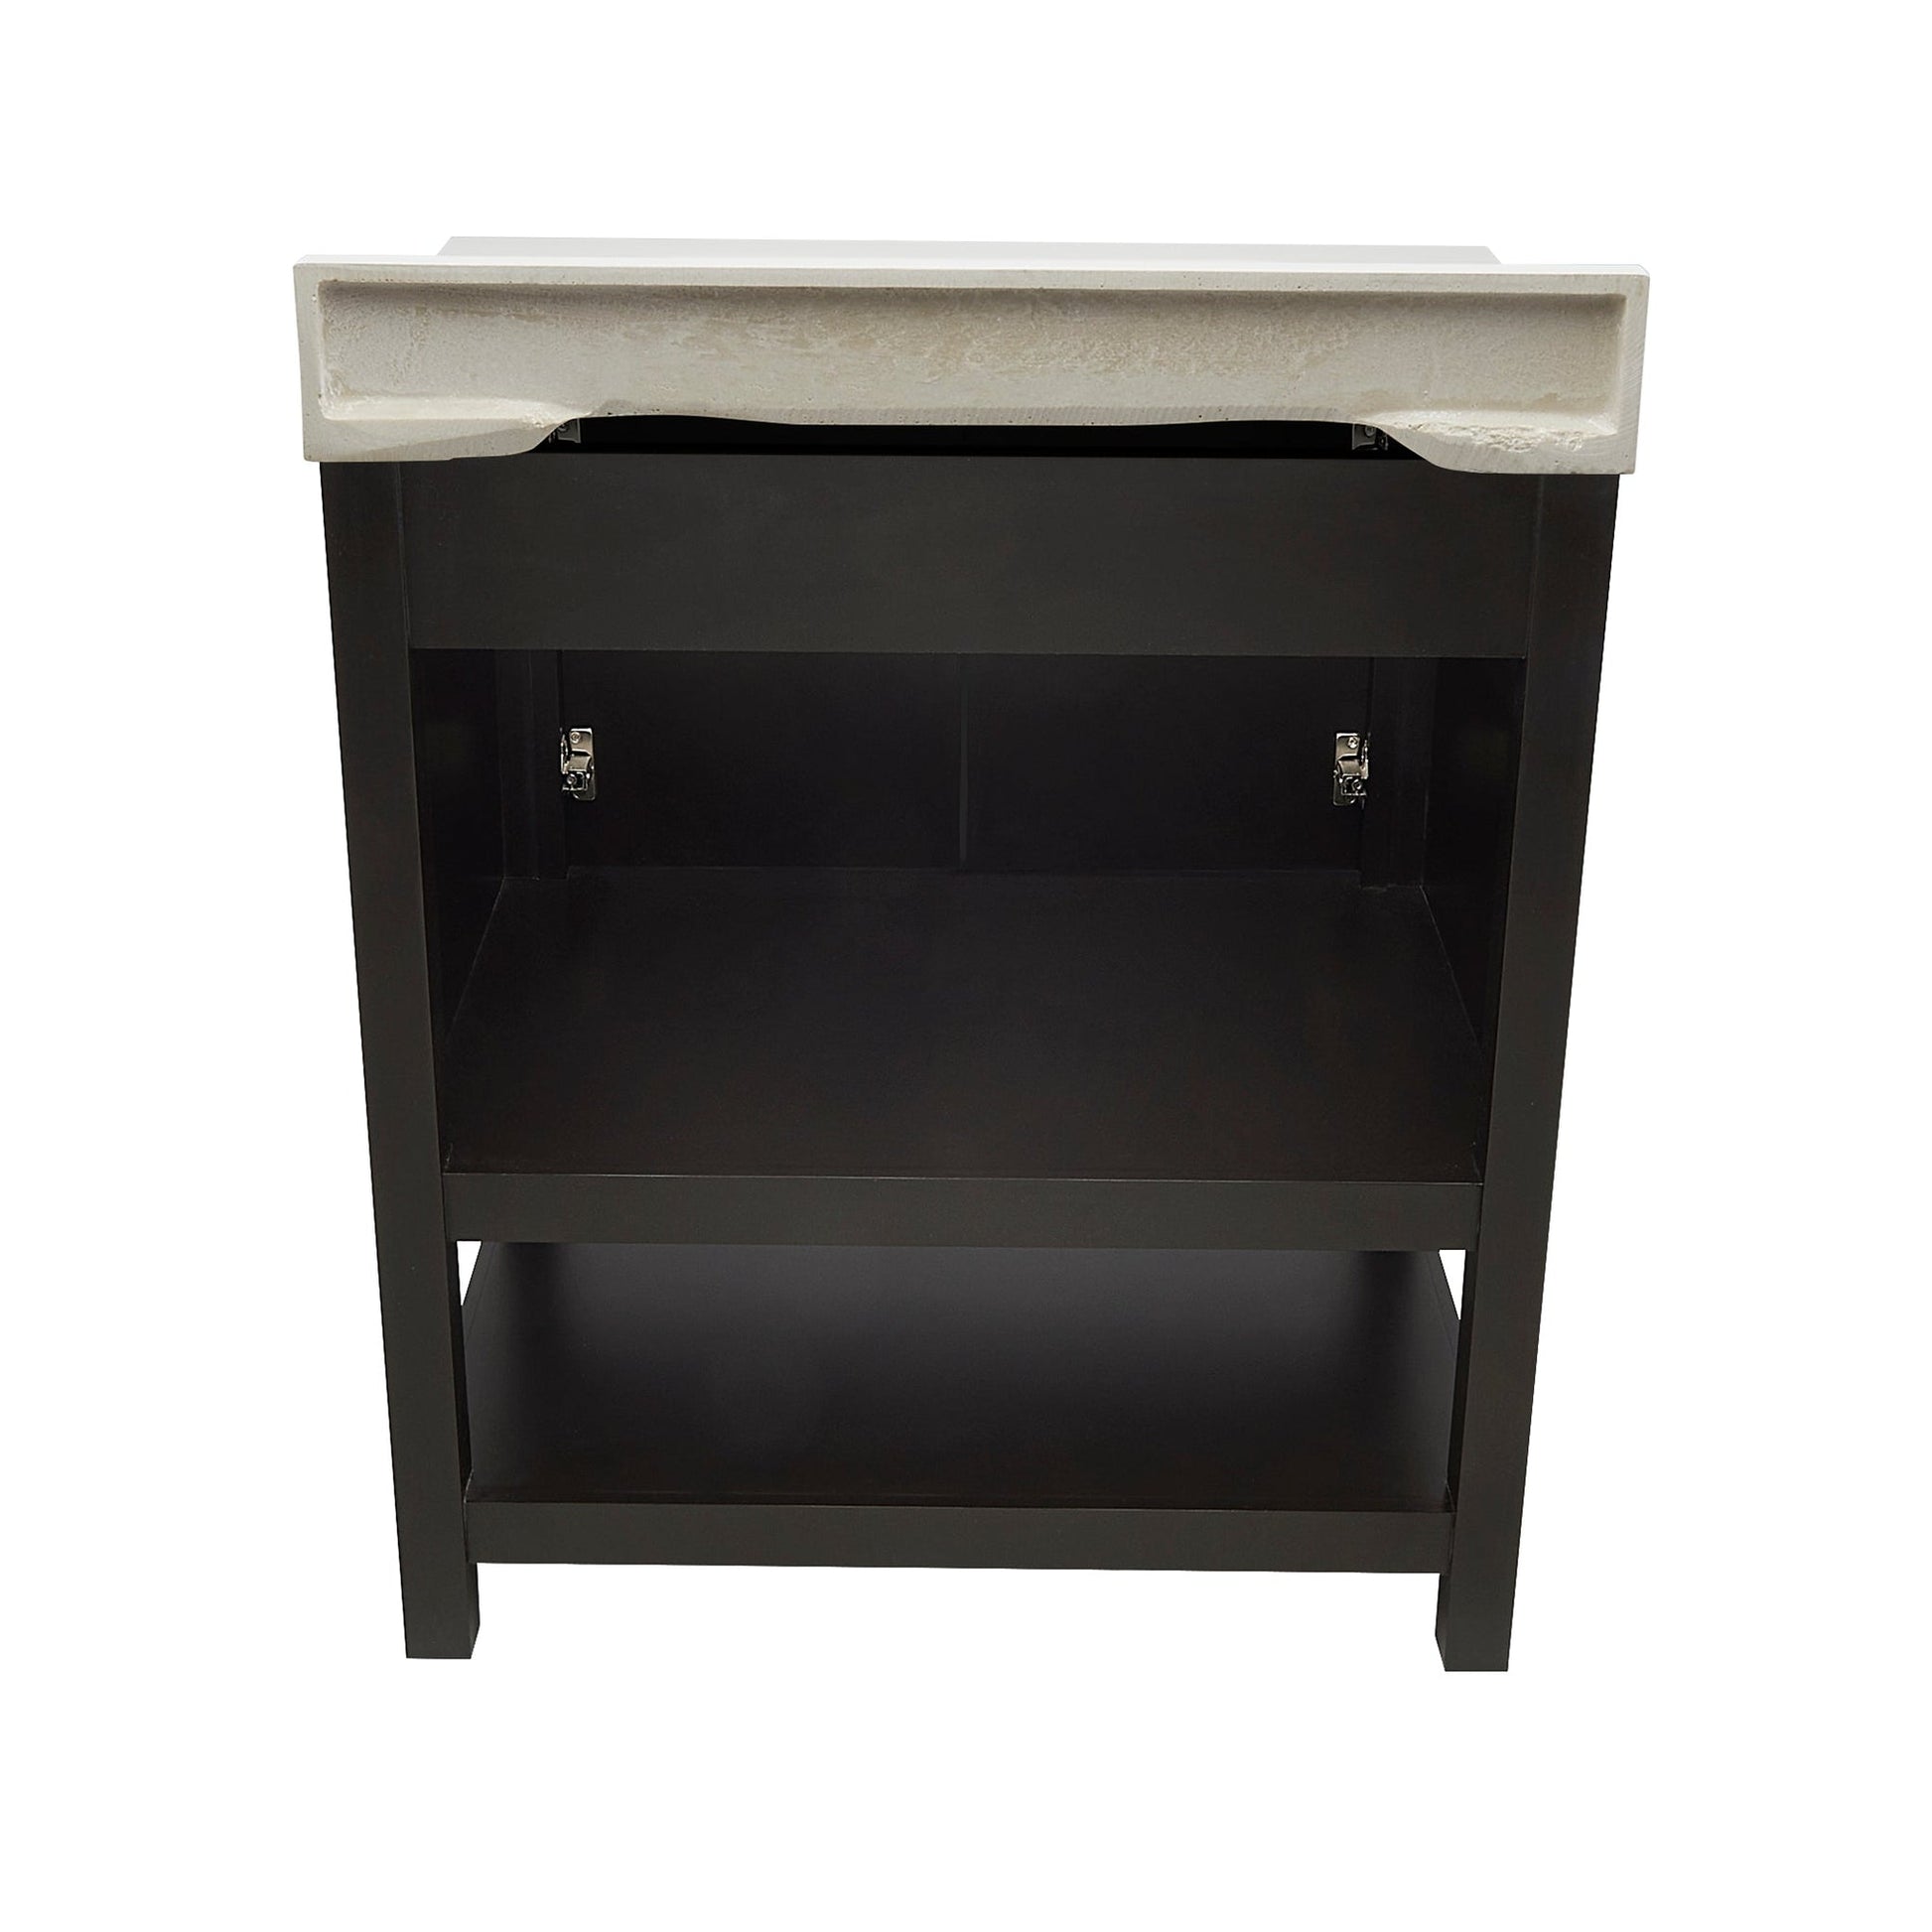 Ella's Bubbles Taos 31" Espresso Bathroom Vanity With White Cultured Marble Top With Backsplash and Sink